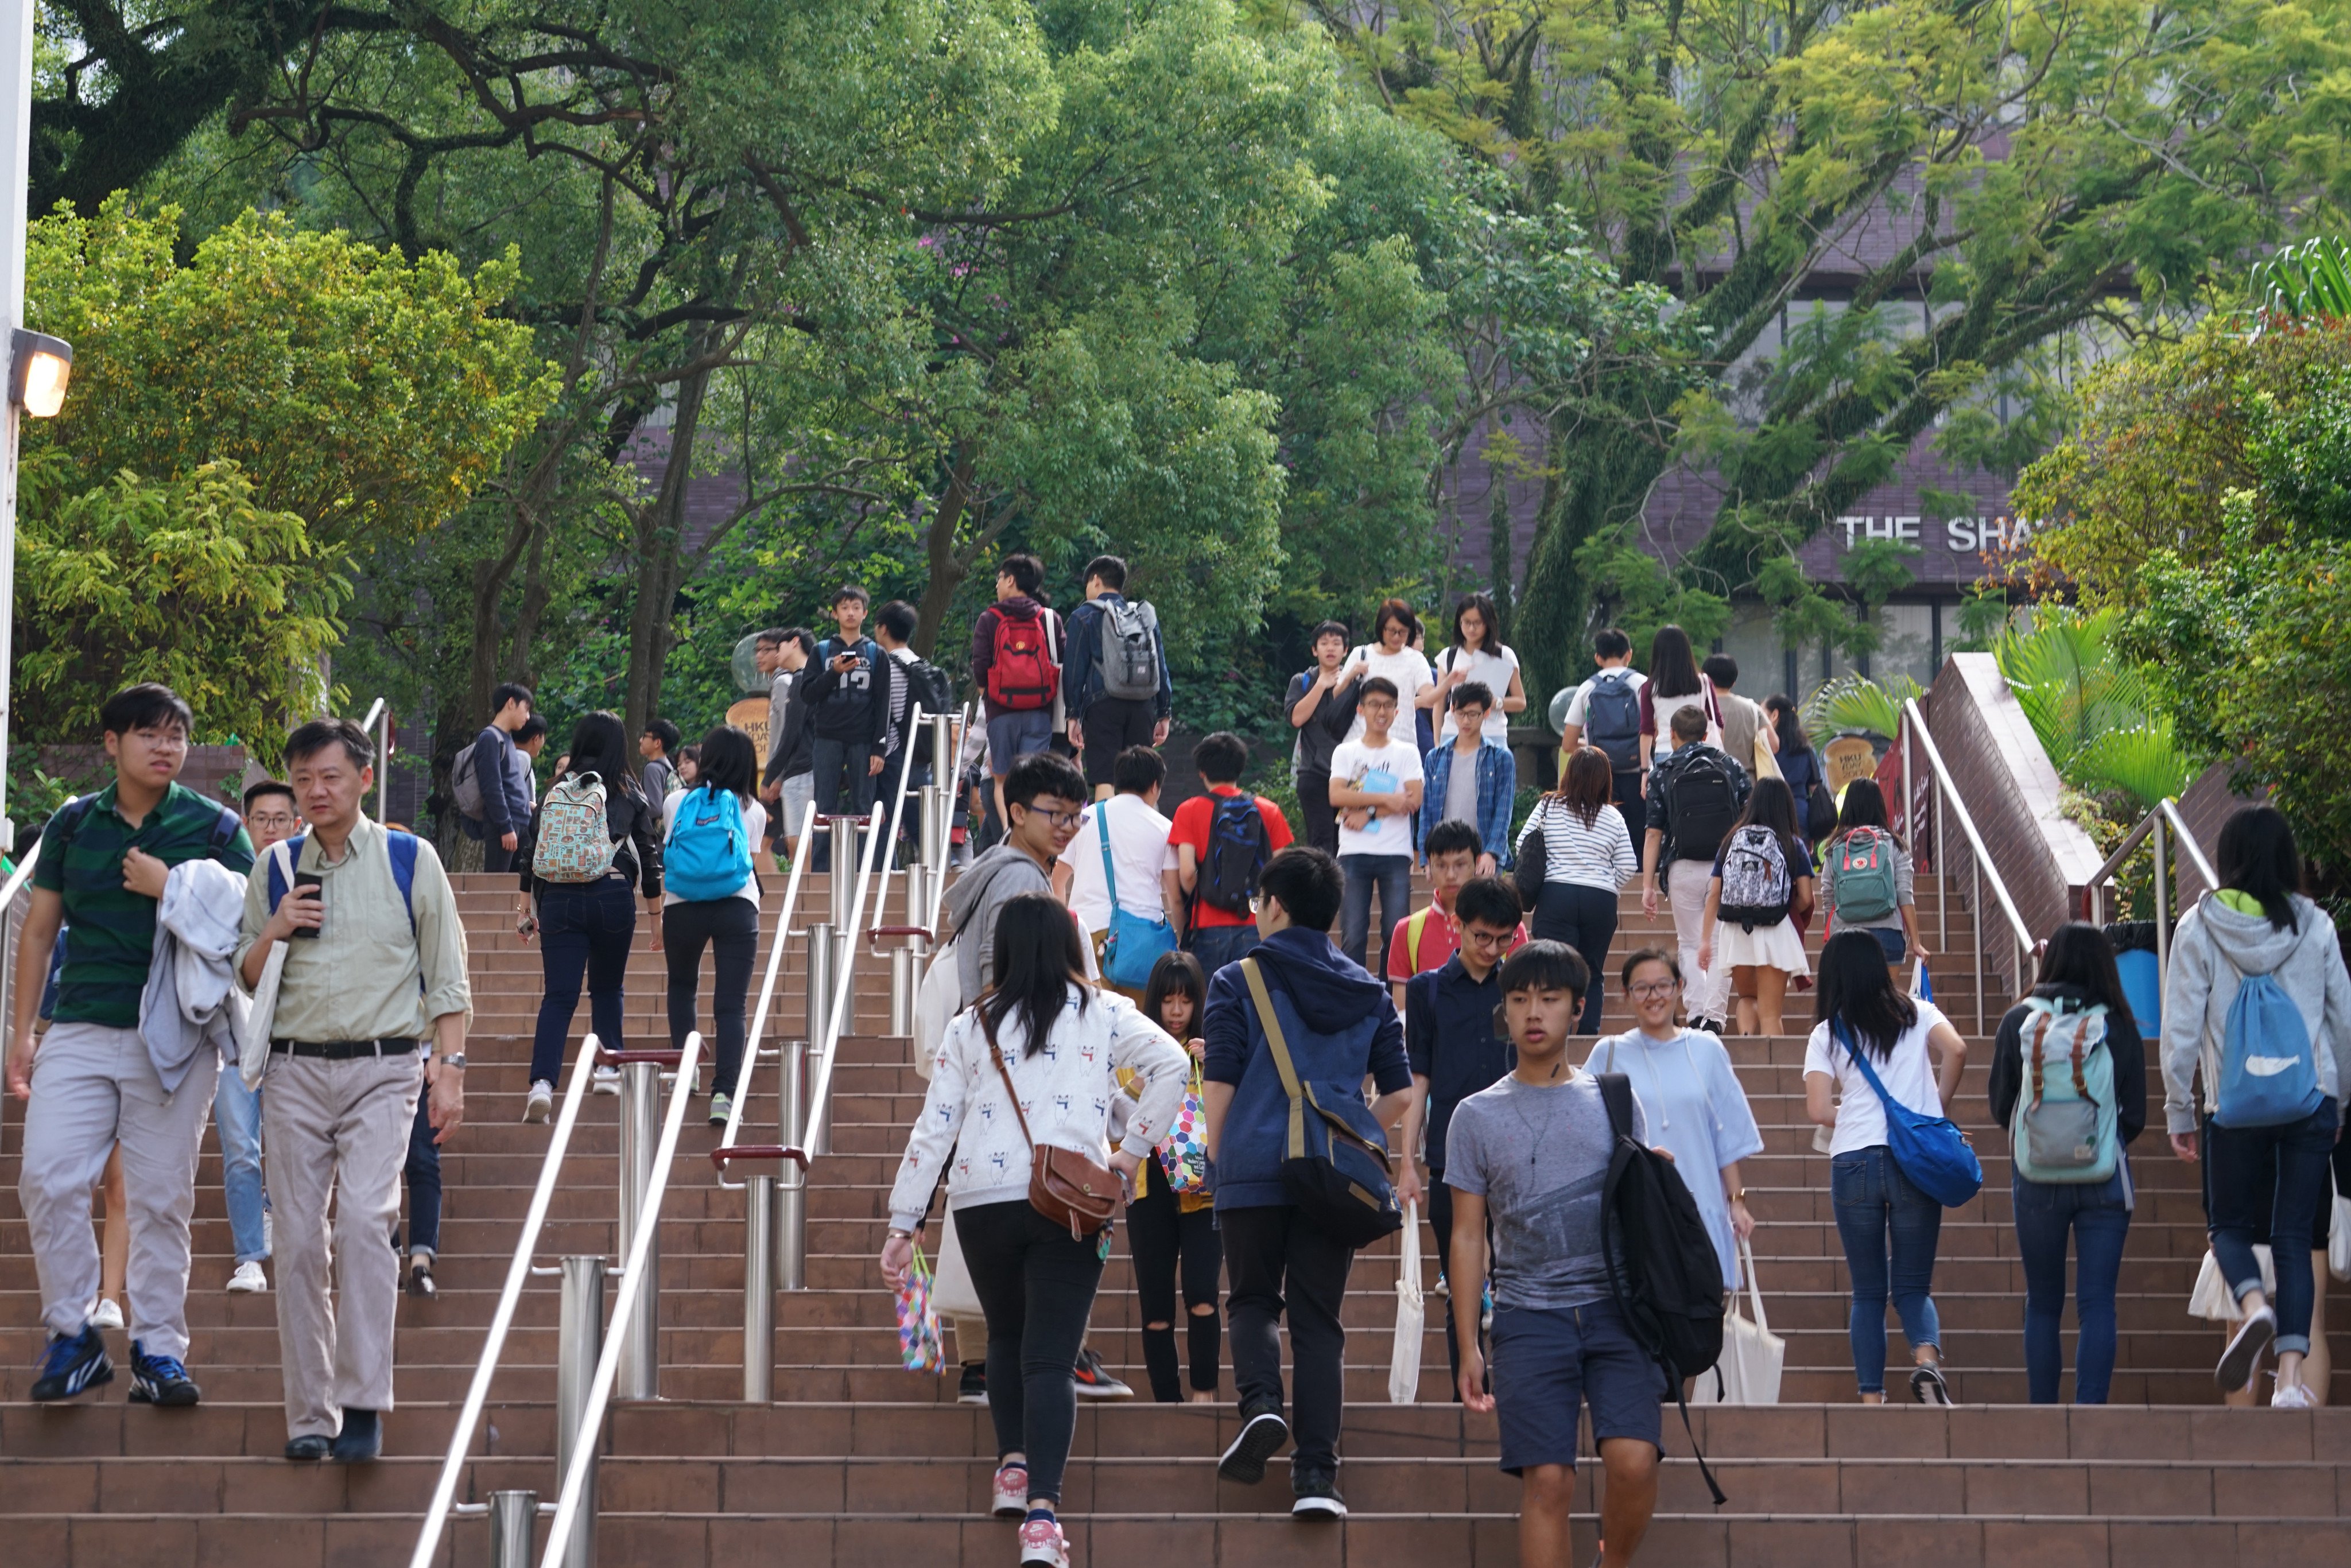 University of Hong Kong students seen on their campus.